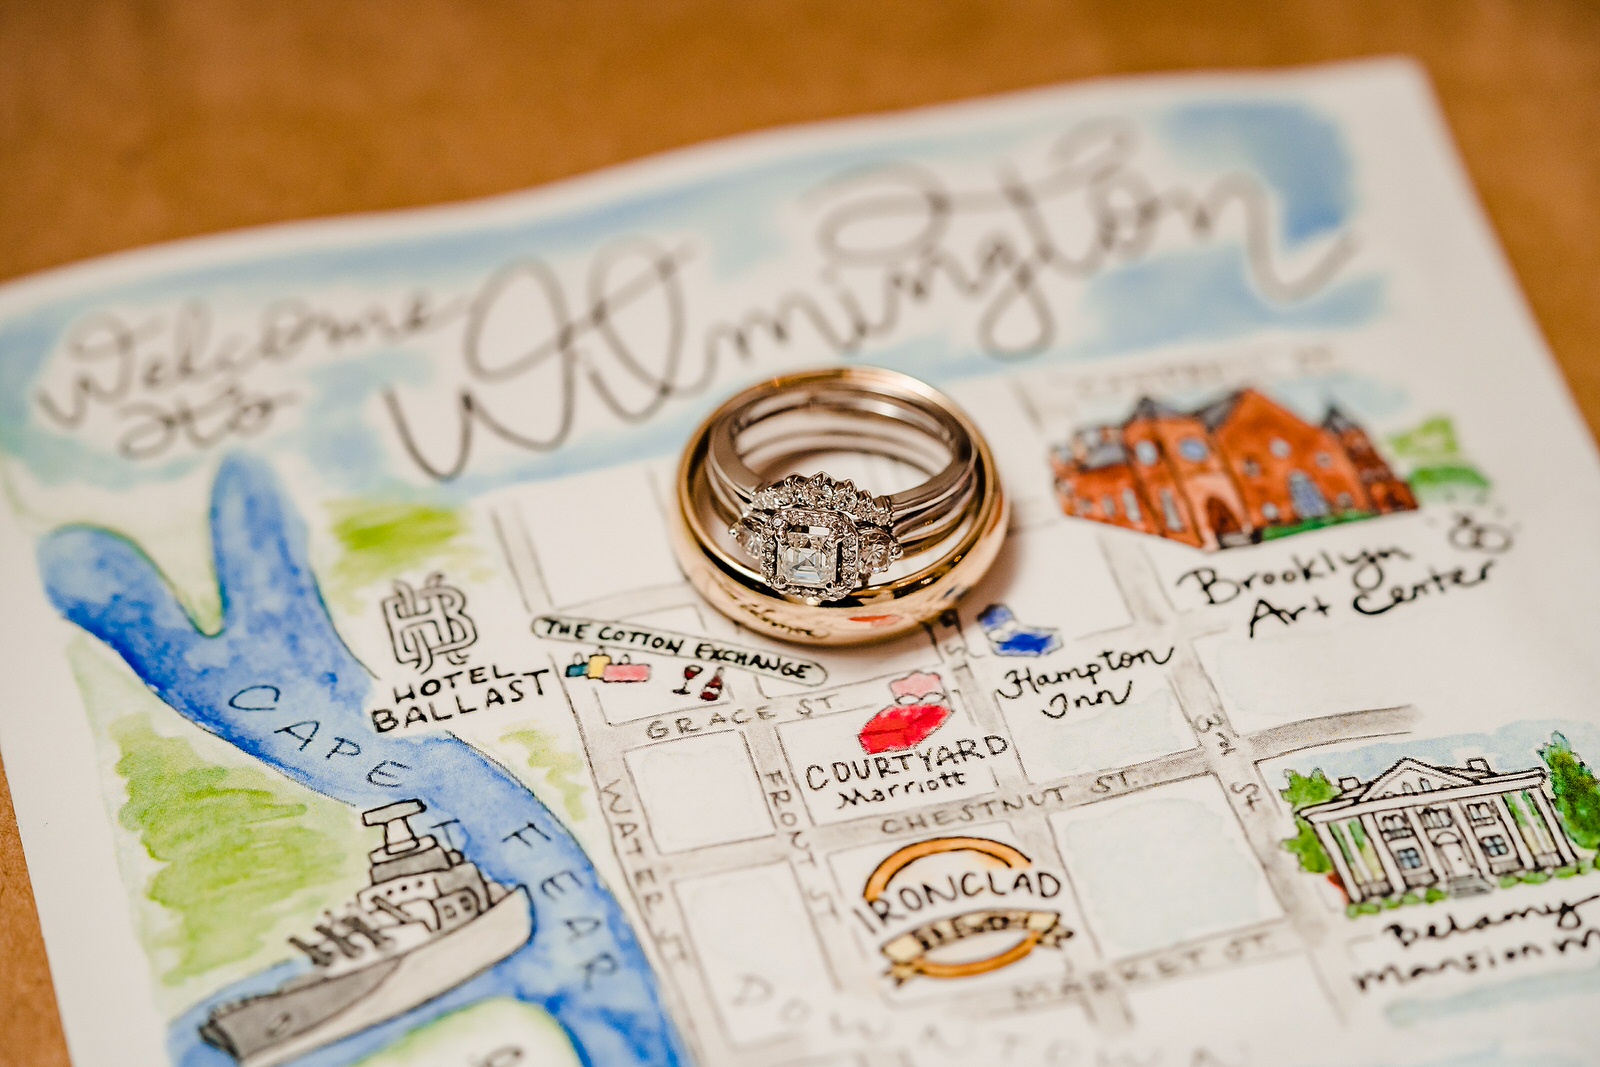 A couple's wedding ring set sits on top of a hand drawn map of Wilmington, NC featuring their hotels, their wedding venue, the Brooklyn Arts Center, and several local attractions